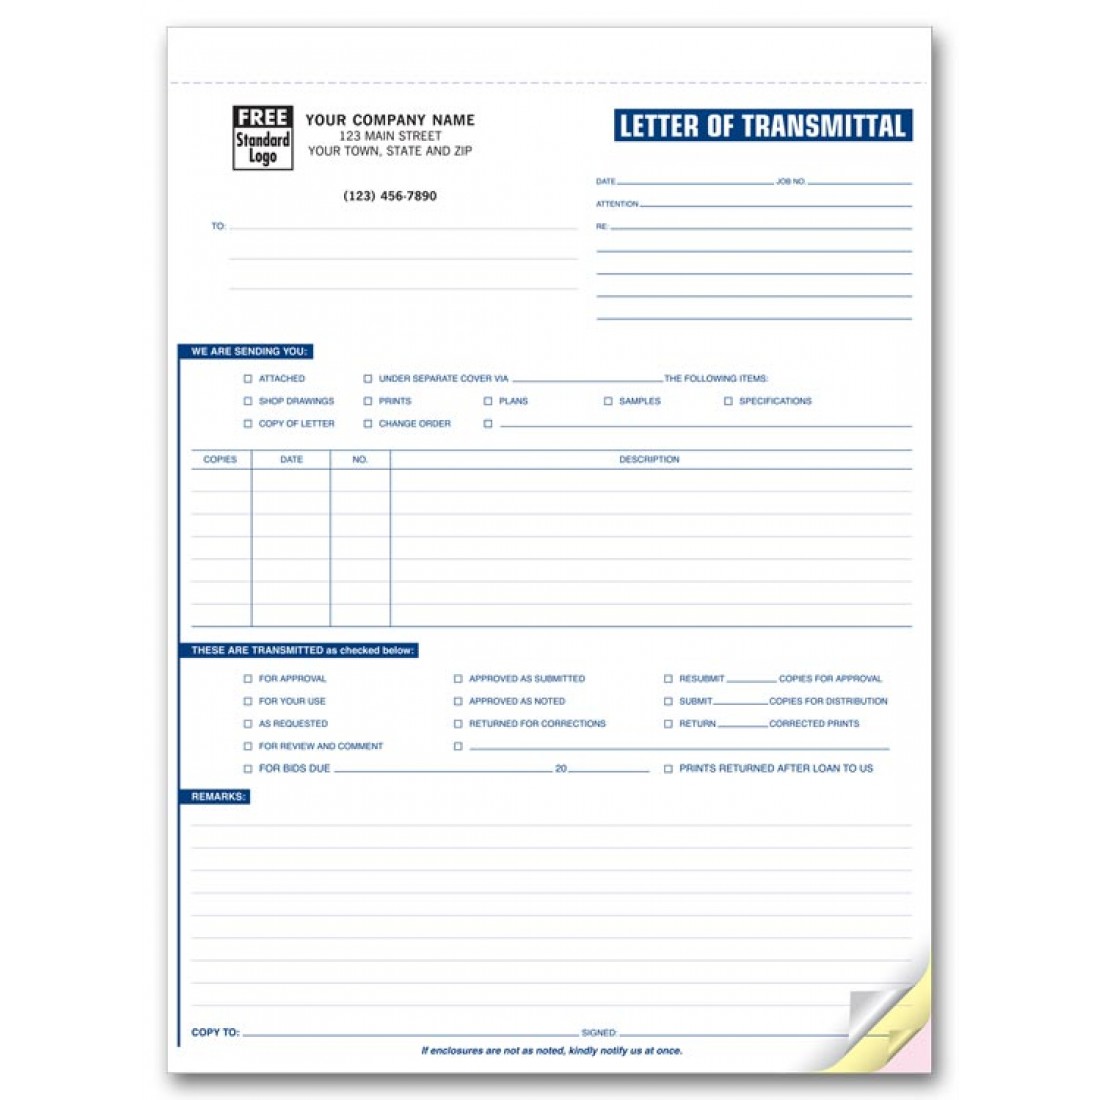 letter-of-transmittal-forms-free-shipping